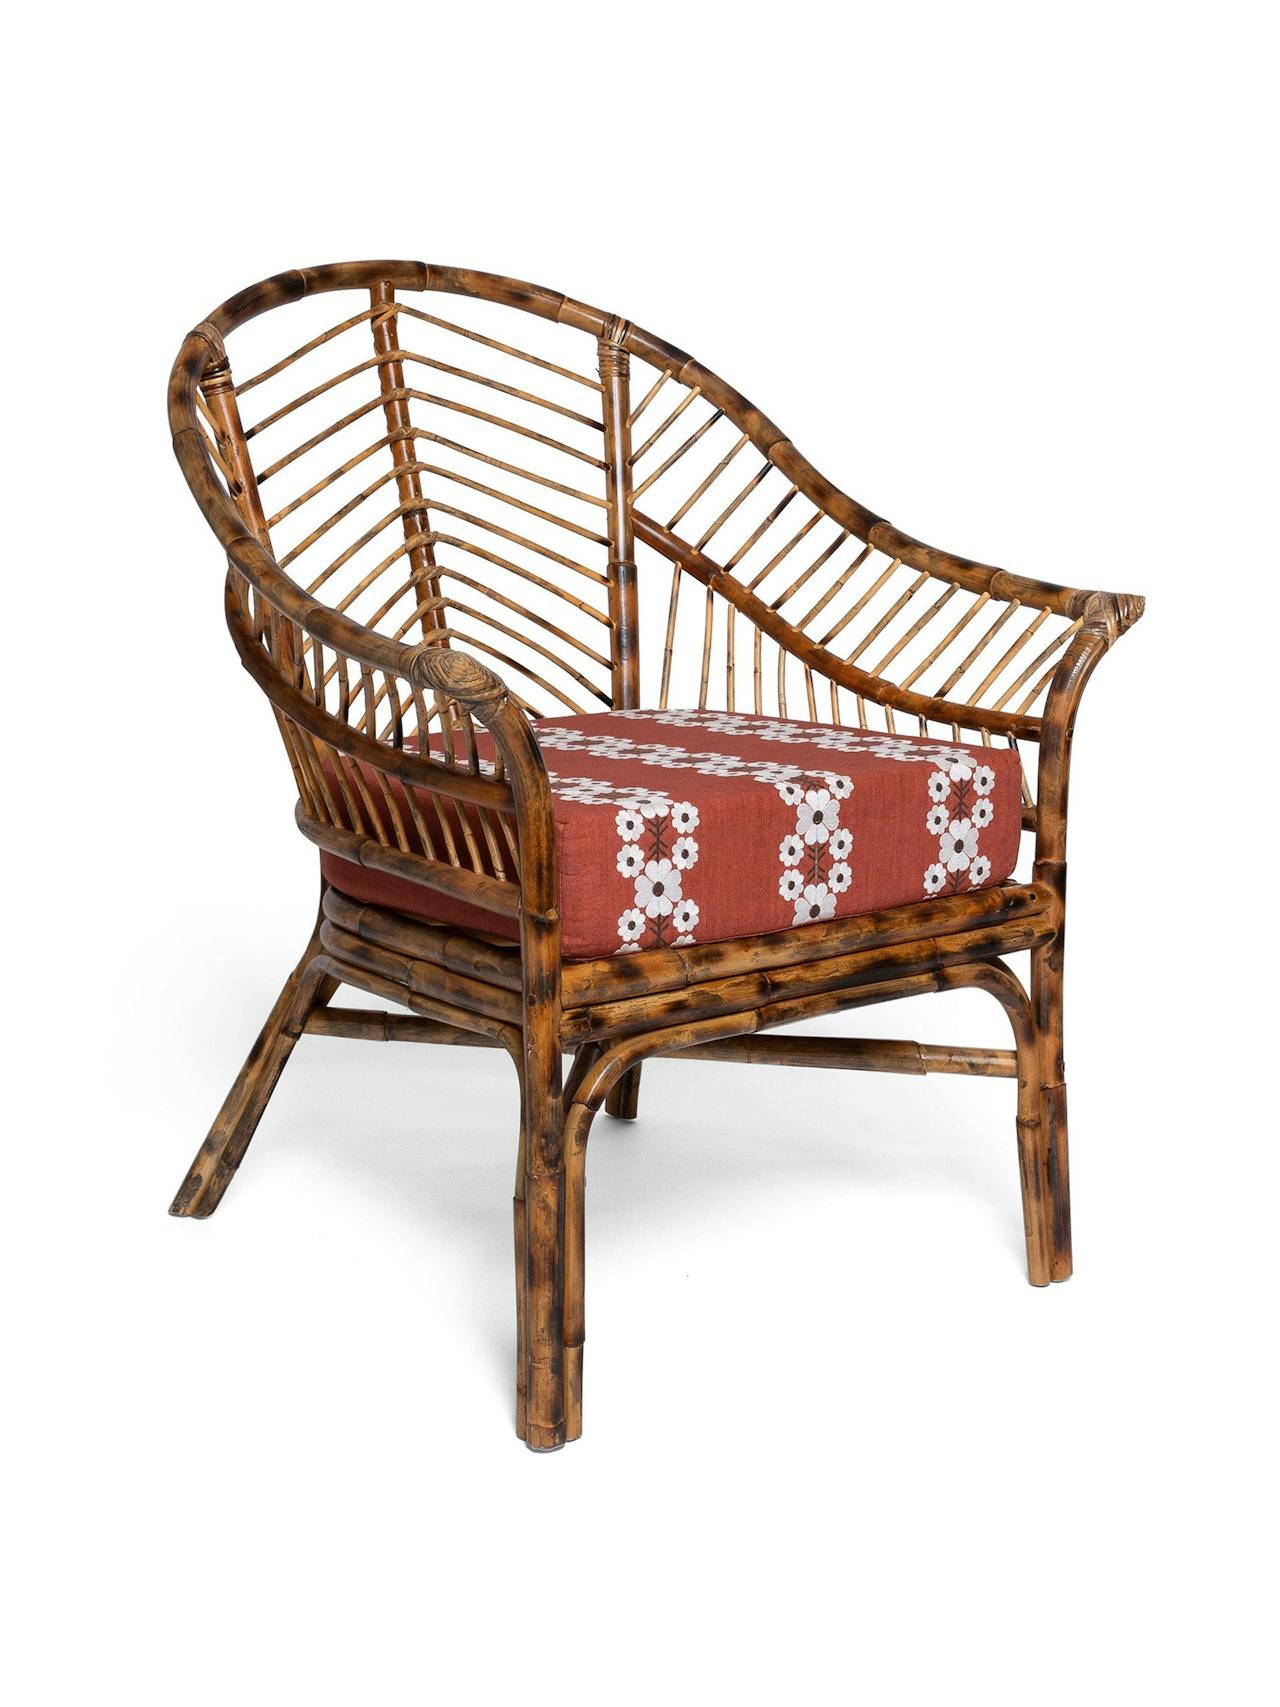 Brick red Piolo bamboo chair